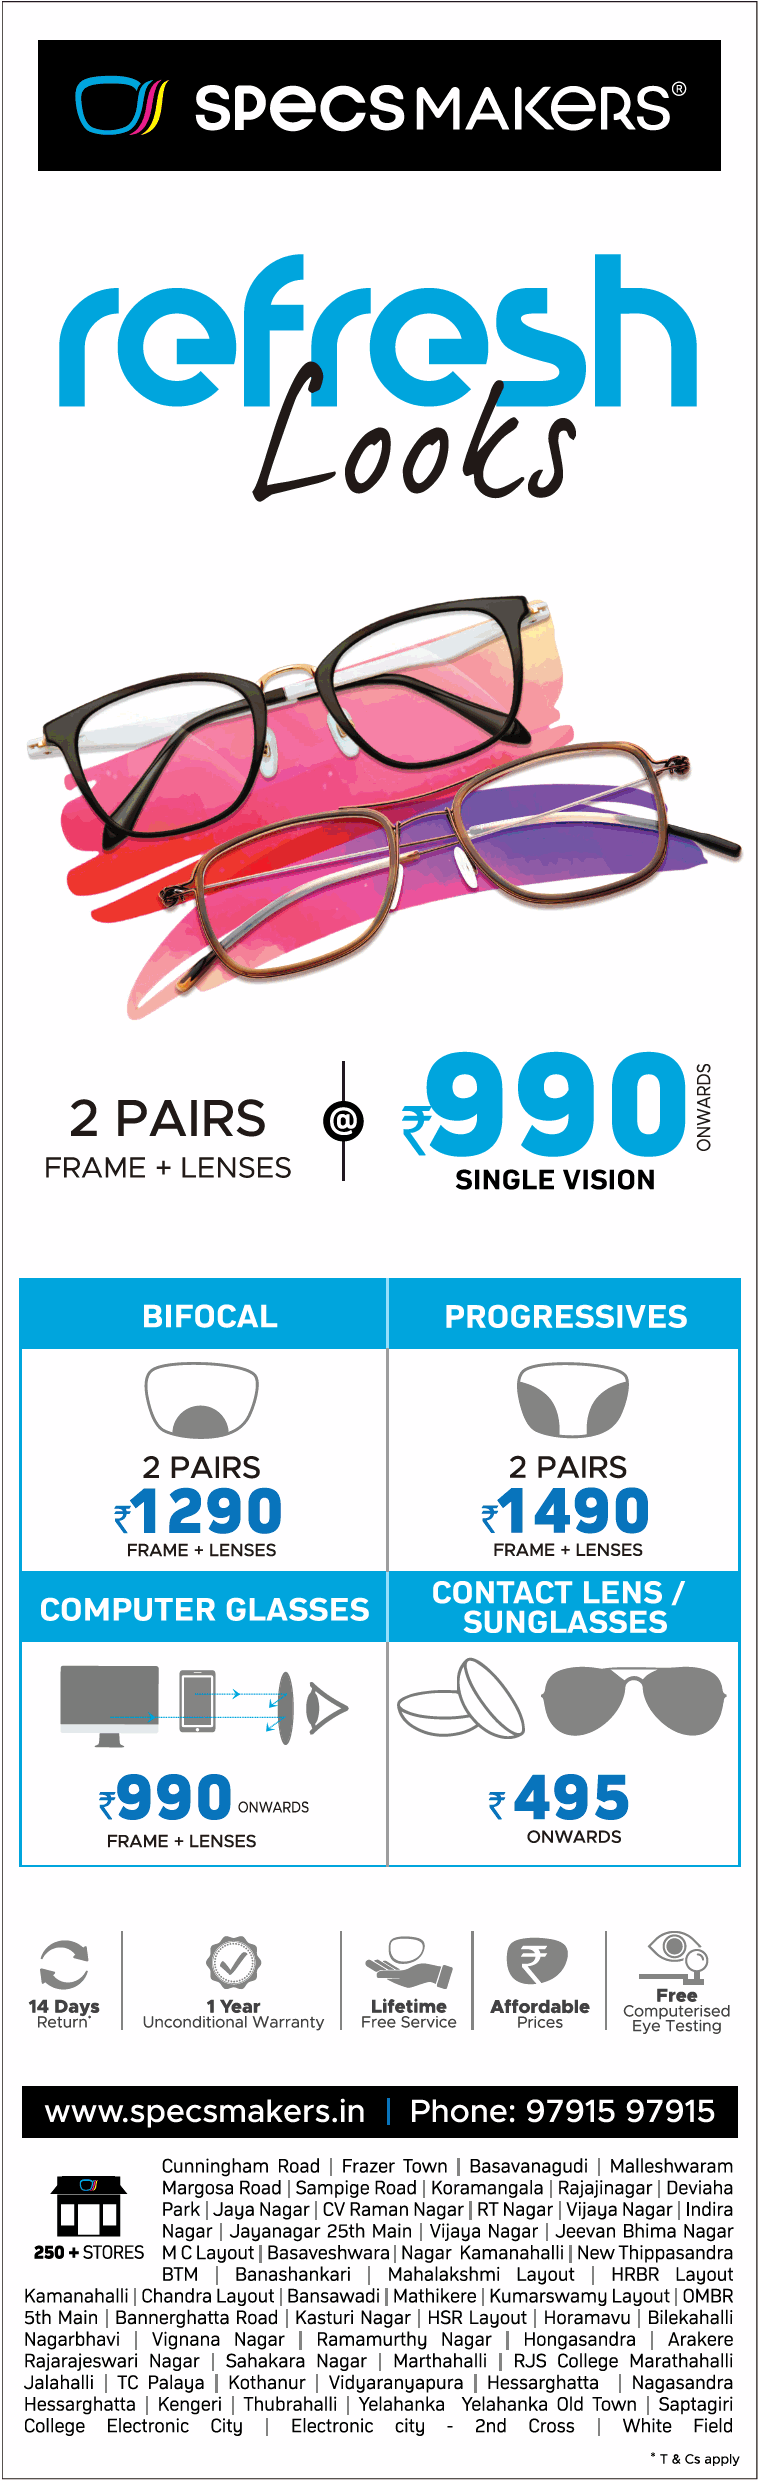 specs-makers-refresh-looks-2-pairs-frame-lenses-rupees-990-single-vision-ad-bangalore-times-15-01-2021